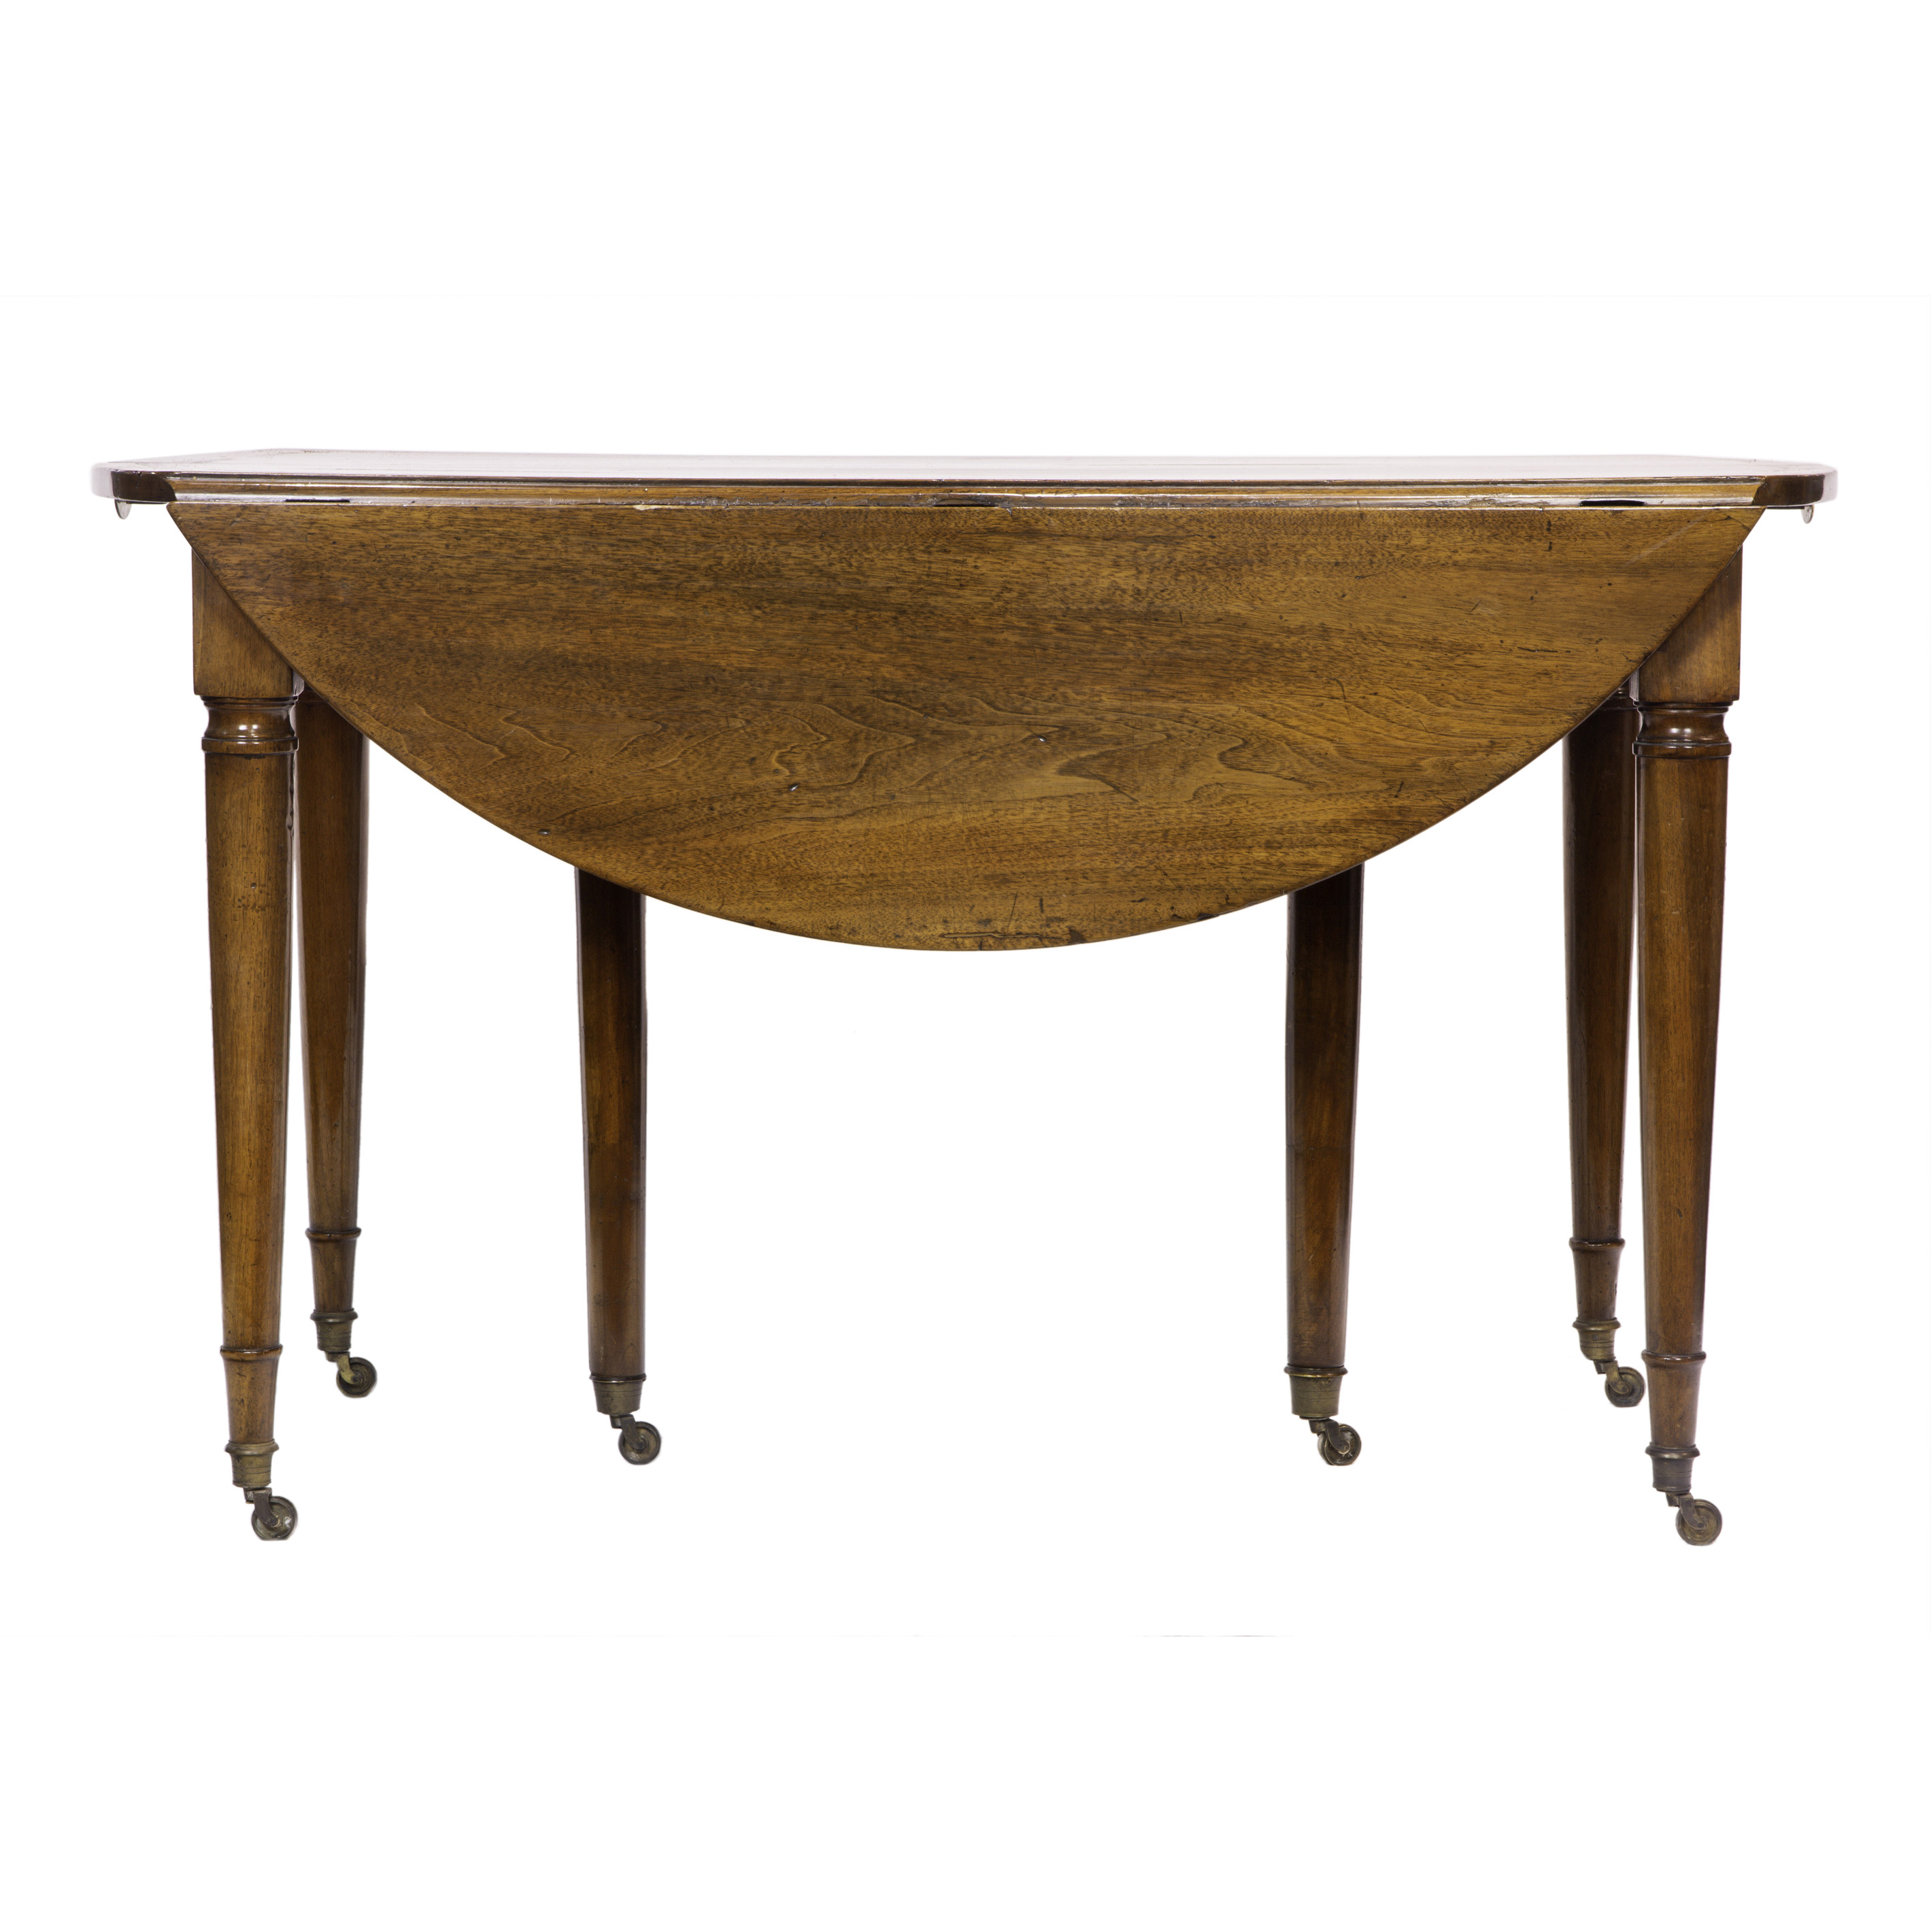 ENGLISH REGENCY EXTENSION DINING 3a45be